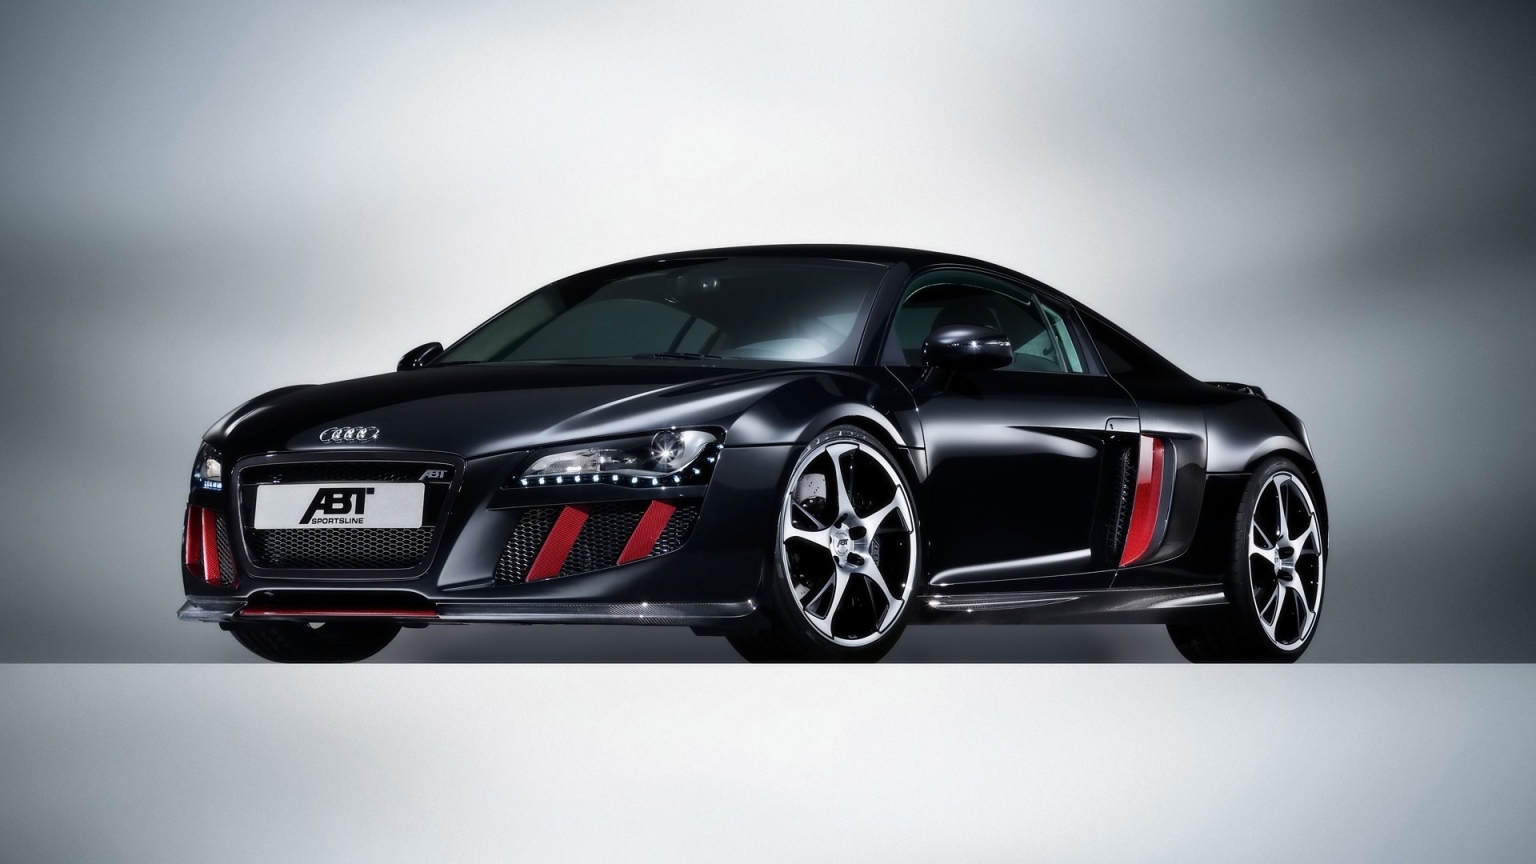 2008 Abt Audi R8 - Front Angle Lights for 1536 x 864 HDTV resolution